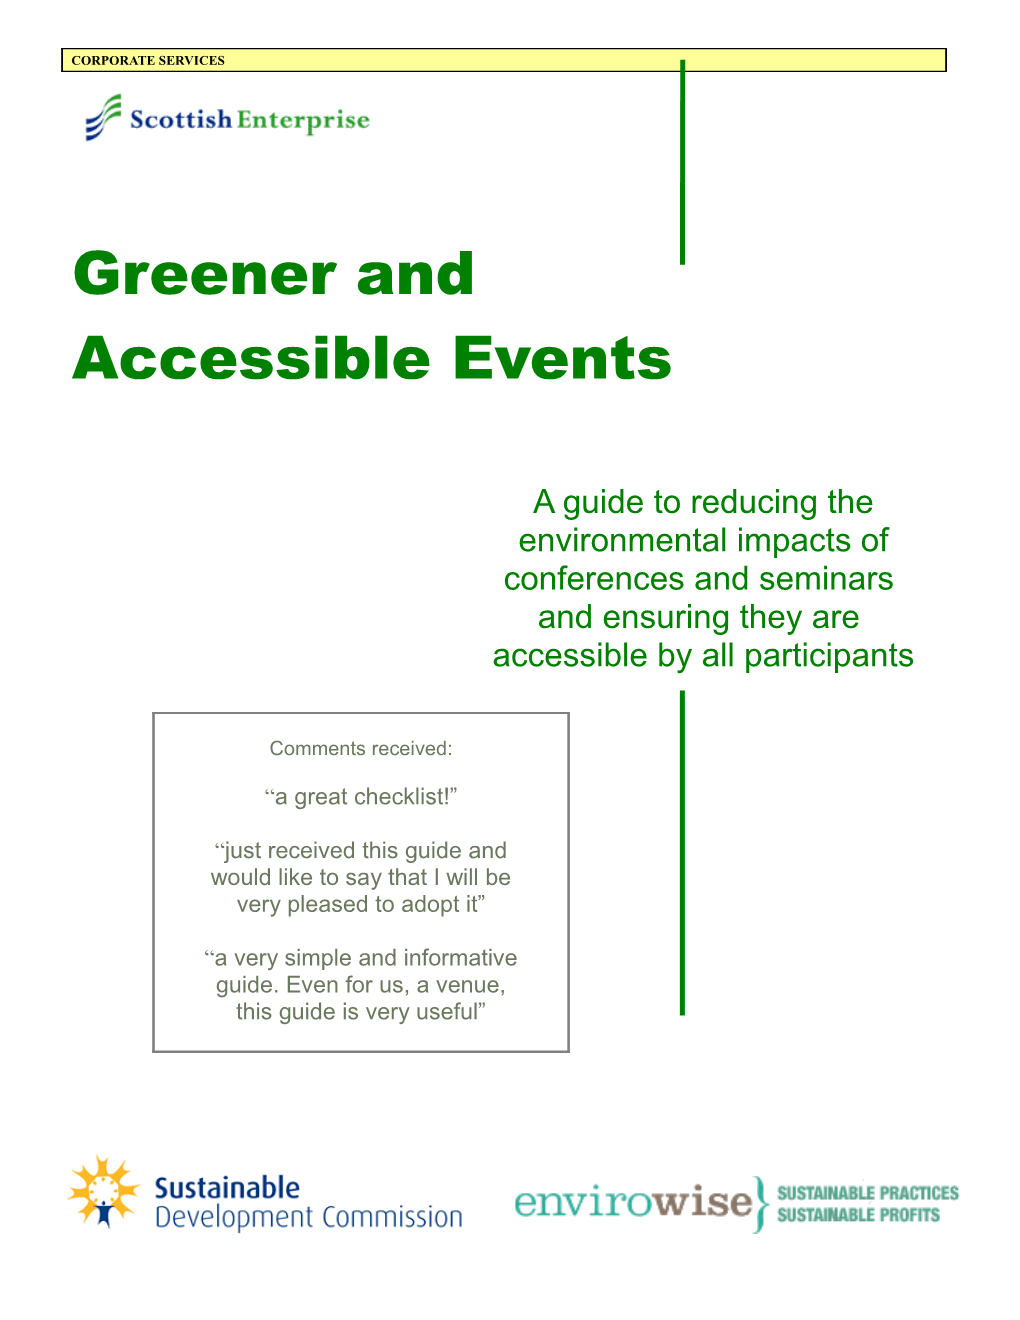 Greener and Accessible Events